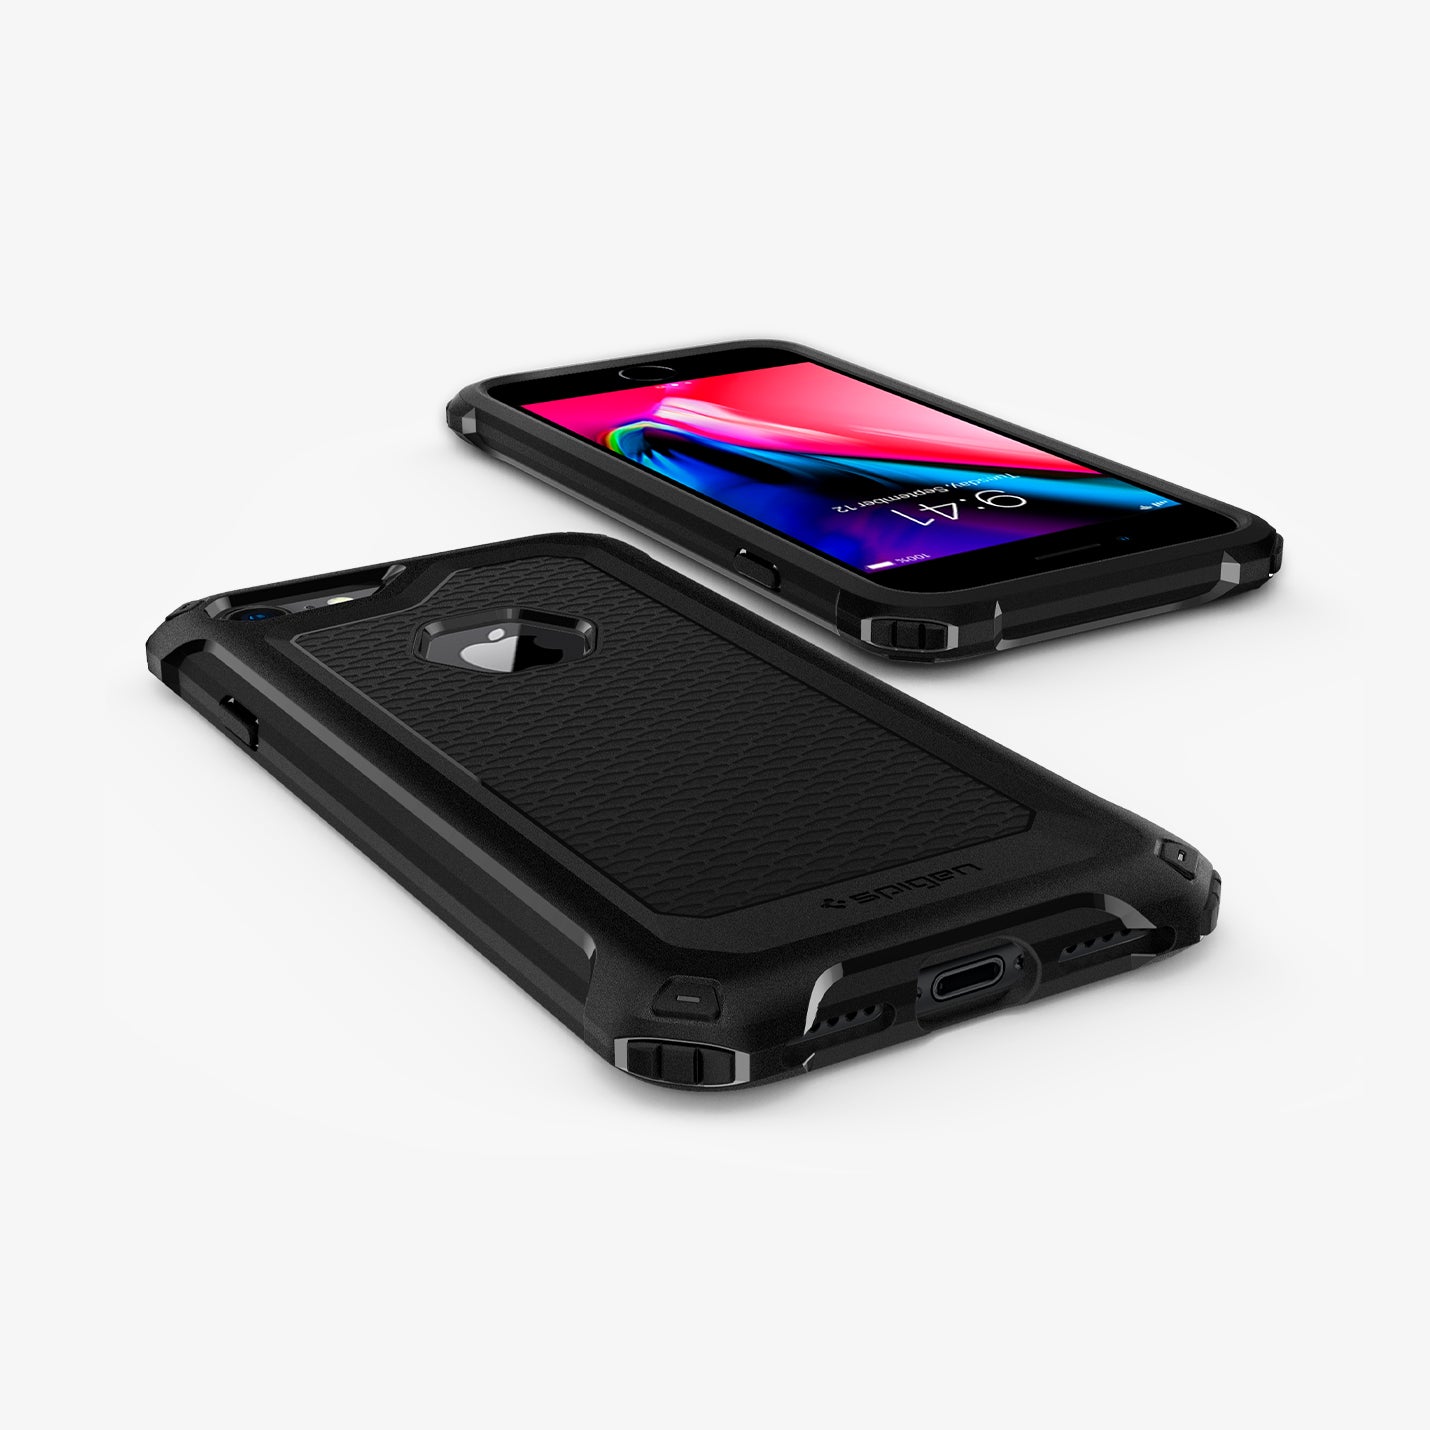 042CS21491 - iPhone 8 Case Rugged Armor Extra in Black showing the back and front of 2 devices showing partial sides, top and bottom on a flat surface